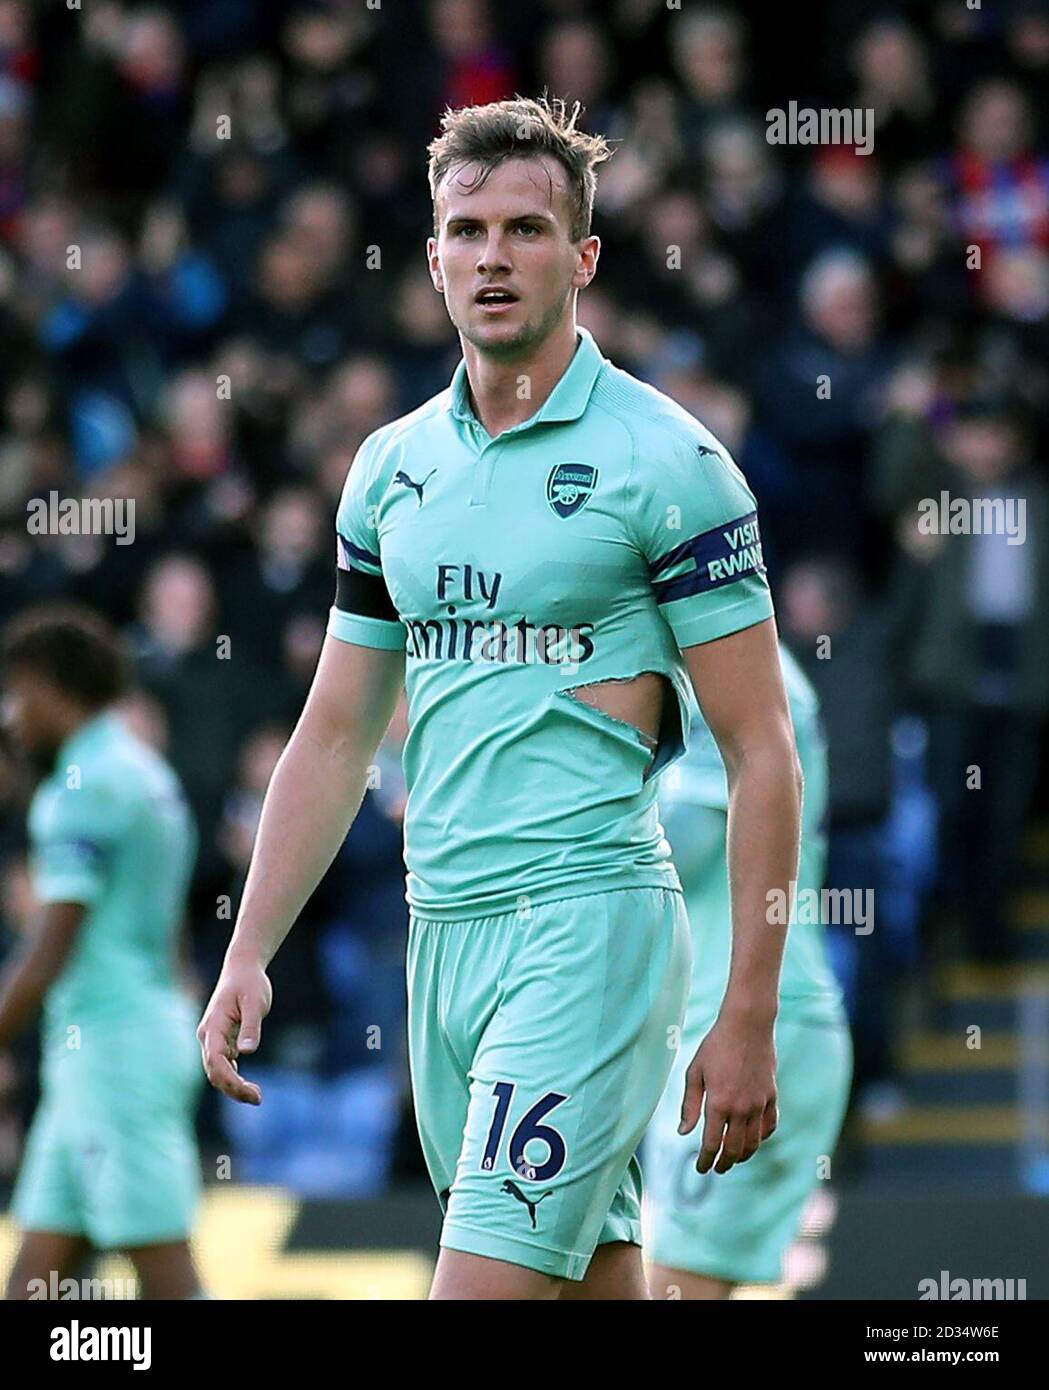 Arsenal's Rob Holding appeals for a penalty during the Premier League match at Selhurst Park, London. PRESS ASSOCIATION Photo. Picture date: Sunday October 28, 2018. See PA story SOCCER Palace. Photo credit should read: Tim Goode/PA Wire. RESTRICTIONS: No use with unauthorised audio, video, data, fixture lists, club/league logos or 'live' services. Online in-match use limited to 120 images, no video emulation. No use in betting, games or single club/league/player publications. Stock Photo